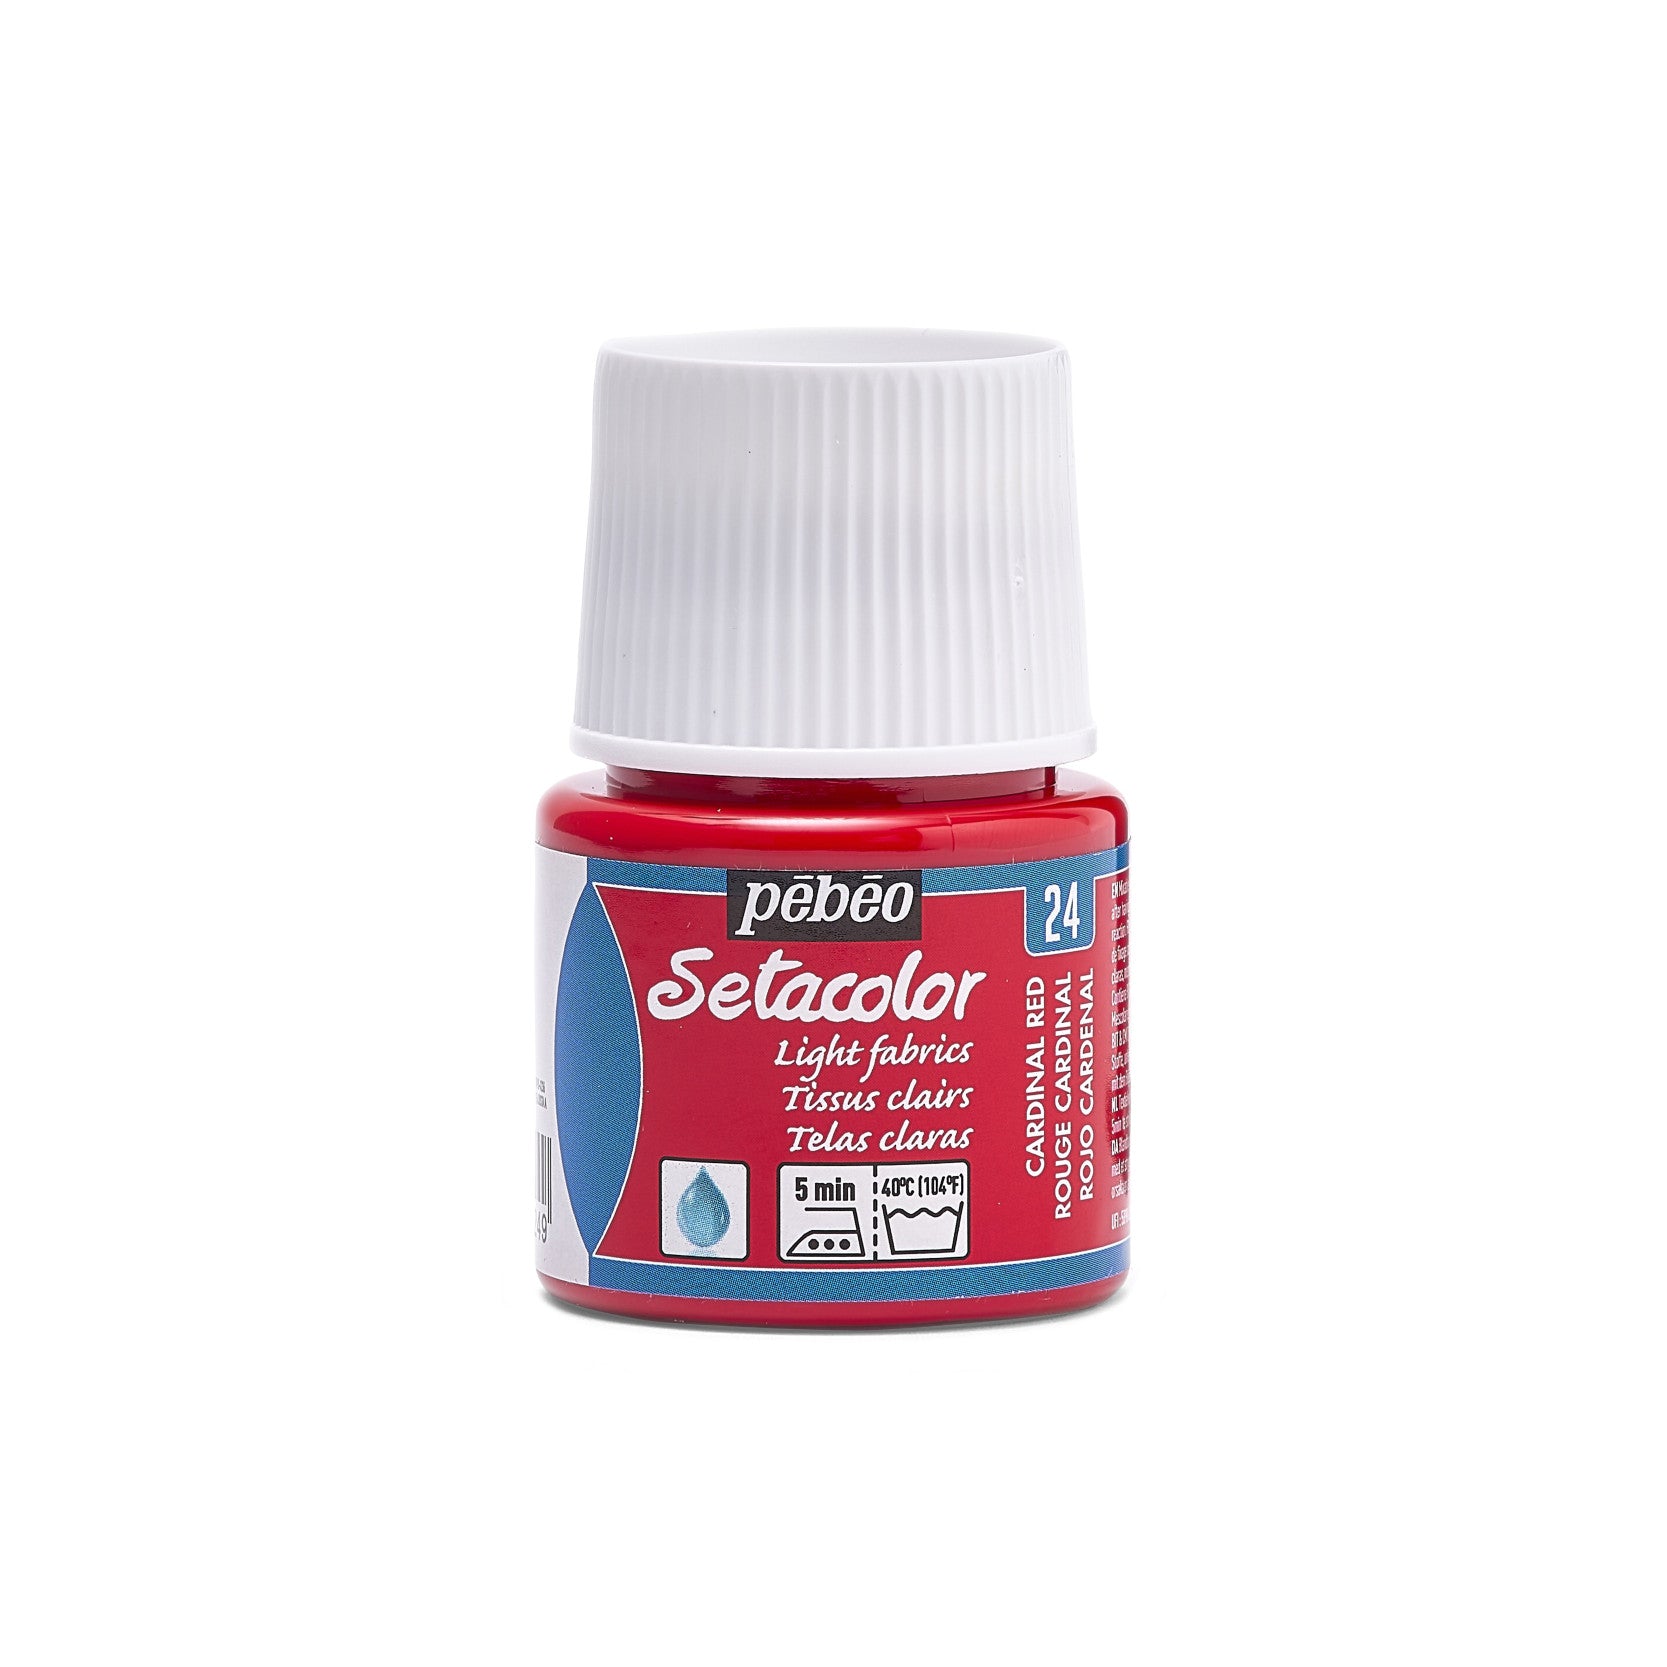 Pebeo Setacolor Opaque Fabric Paint, 45ml, Red